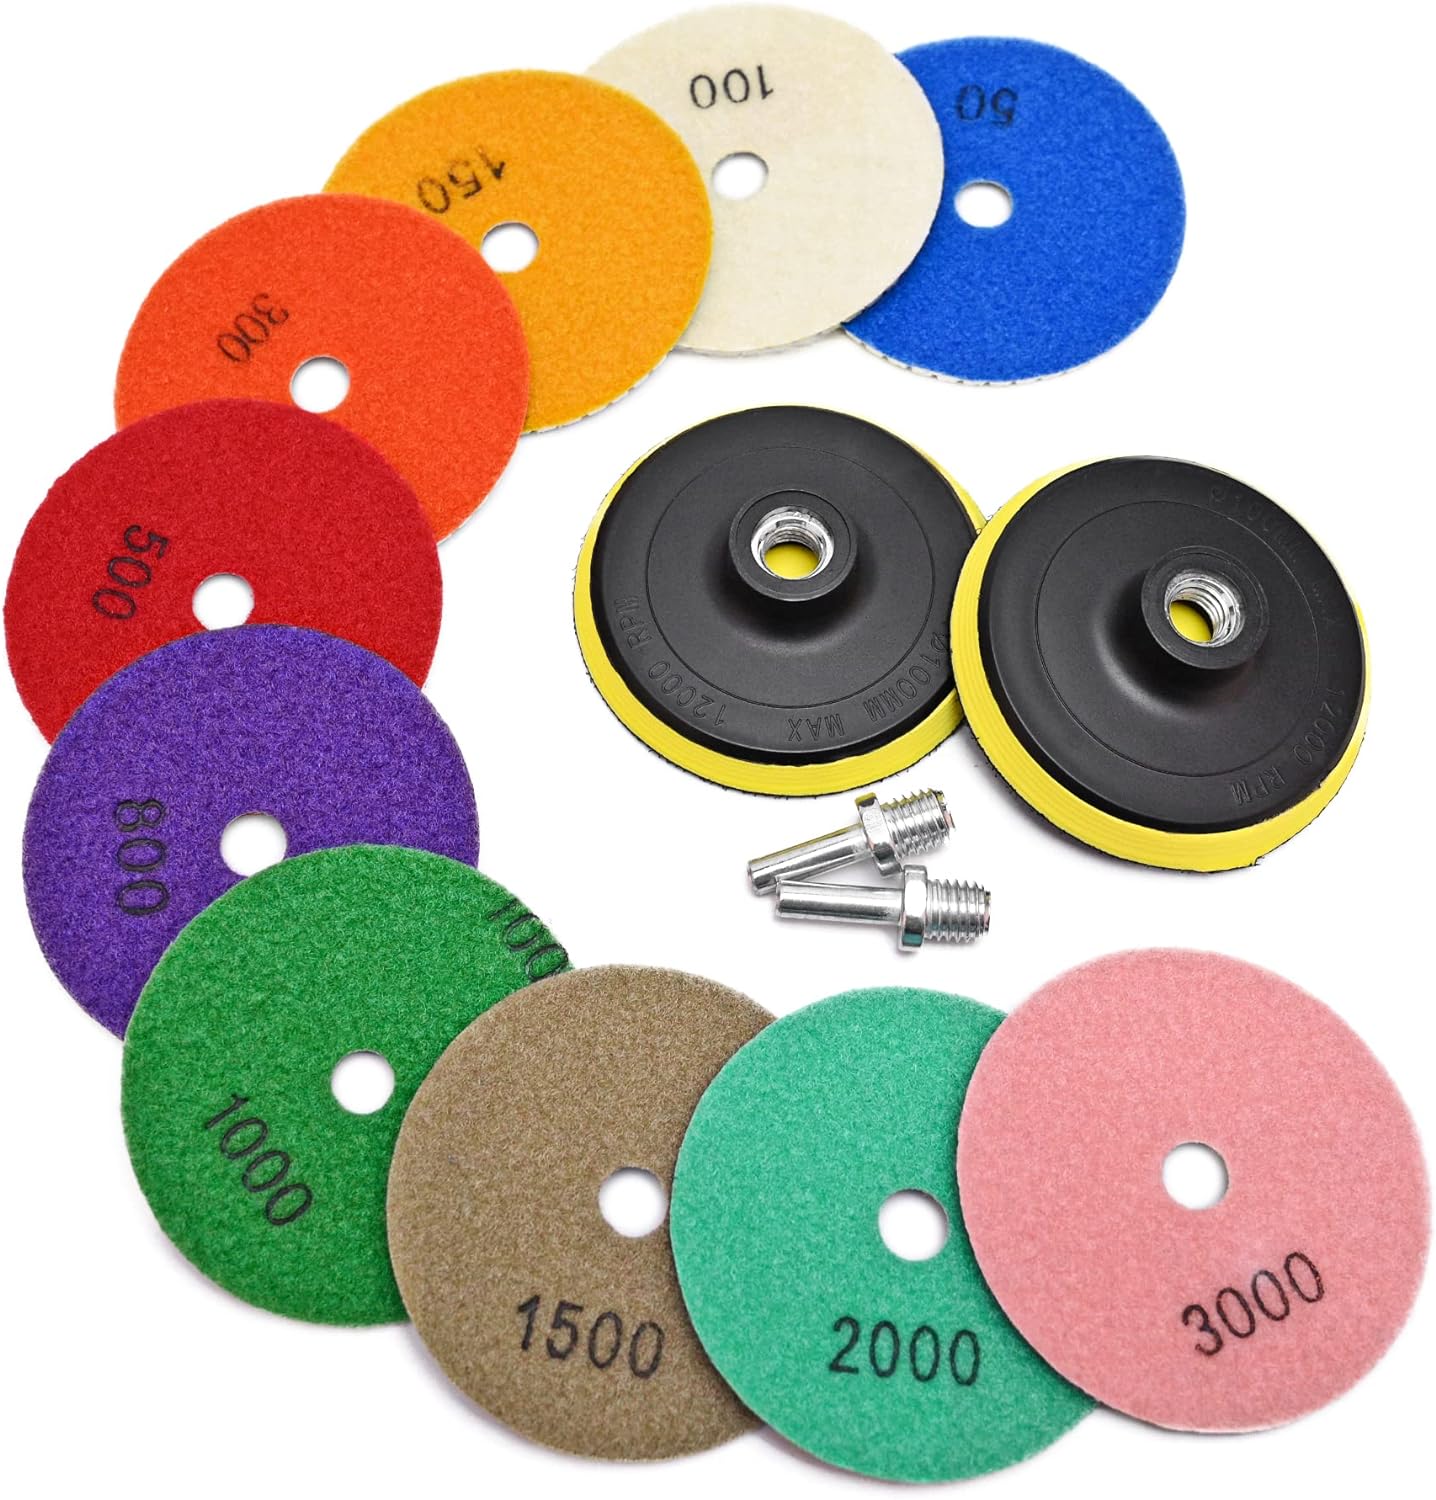 Wet Dry Diamond Polishing 10 Pad 5 Inch For Granite Concrete Marble Glass THICK 